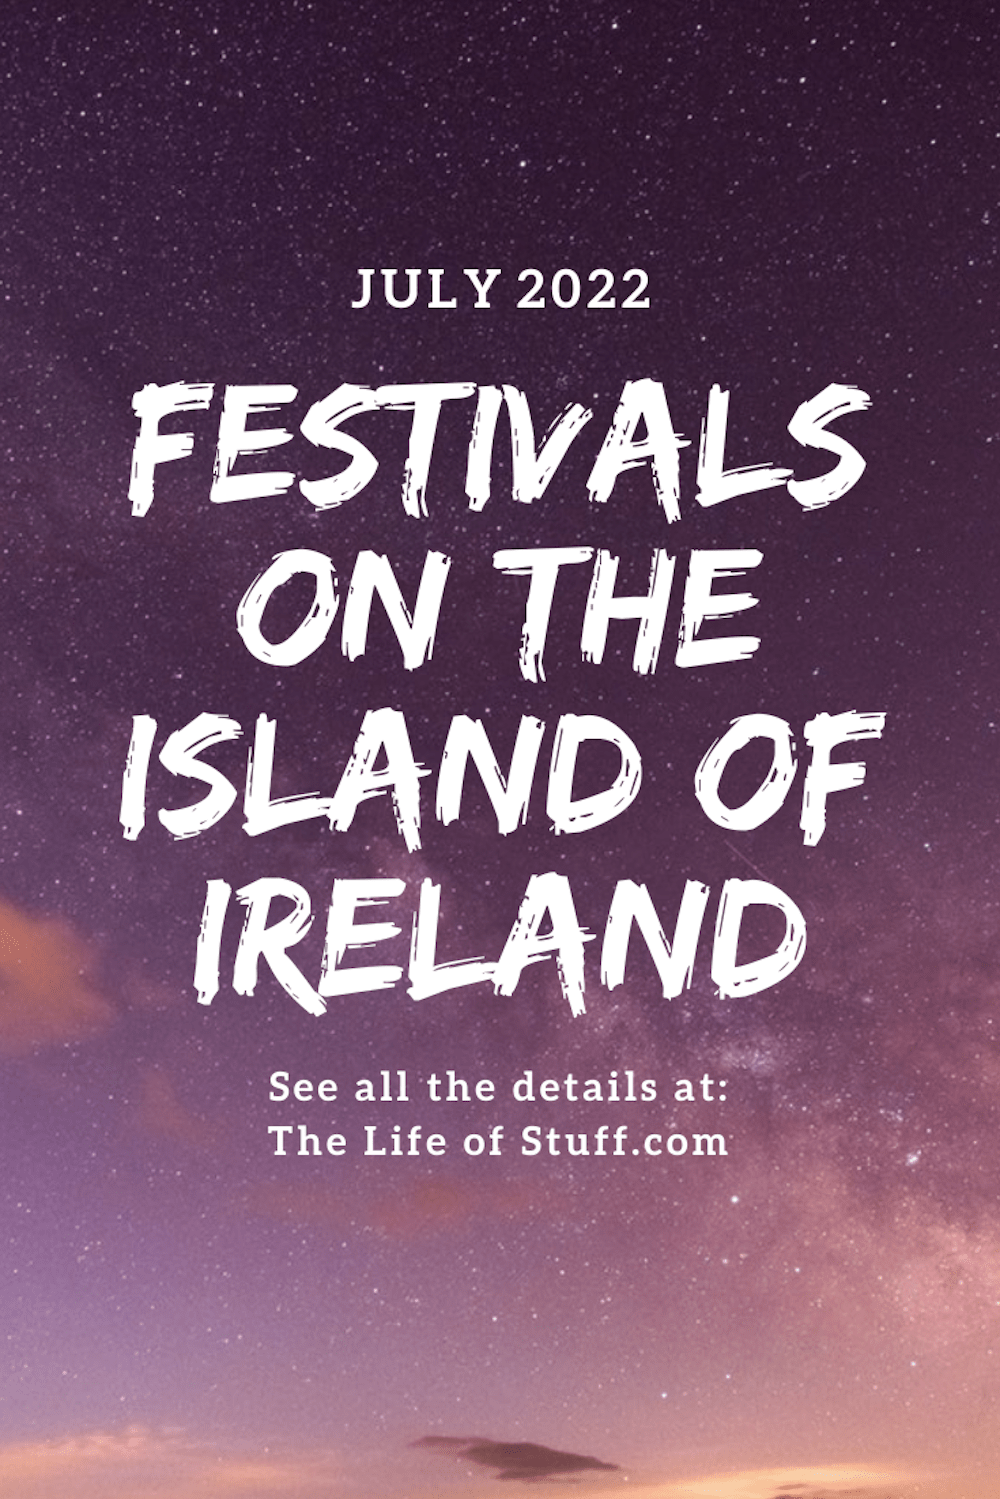 What’s On Festivals this July 2022 on the Island of Ireland - The Life of Stuff